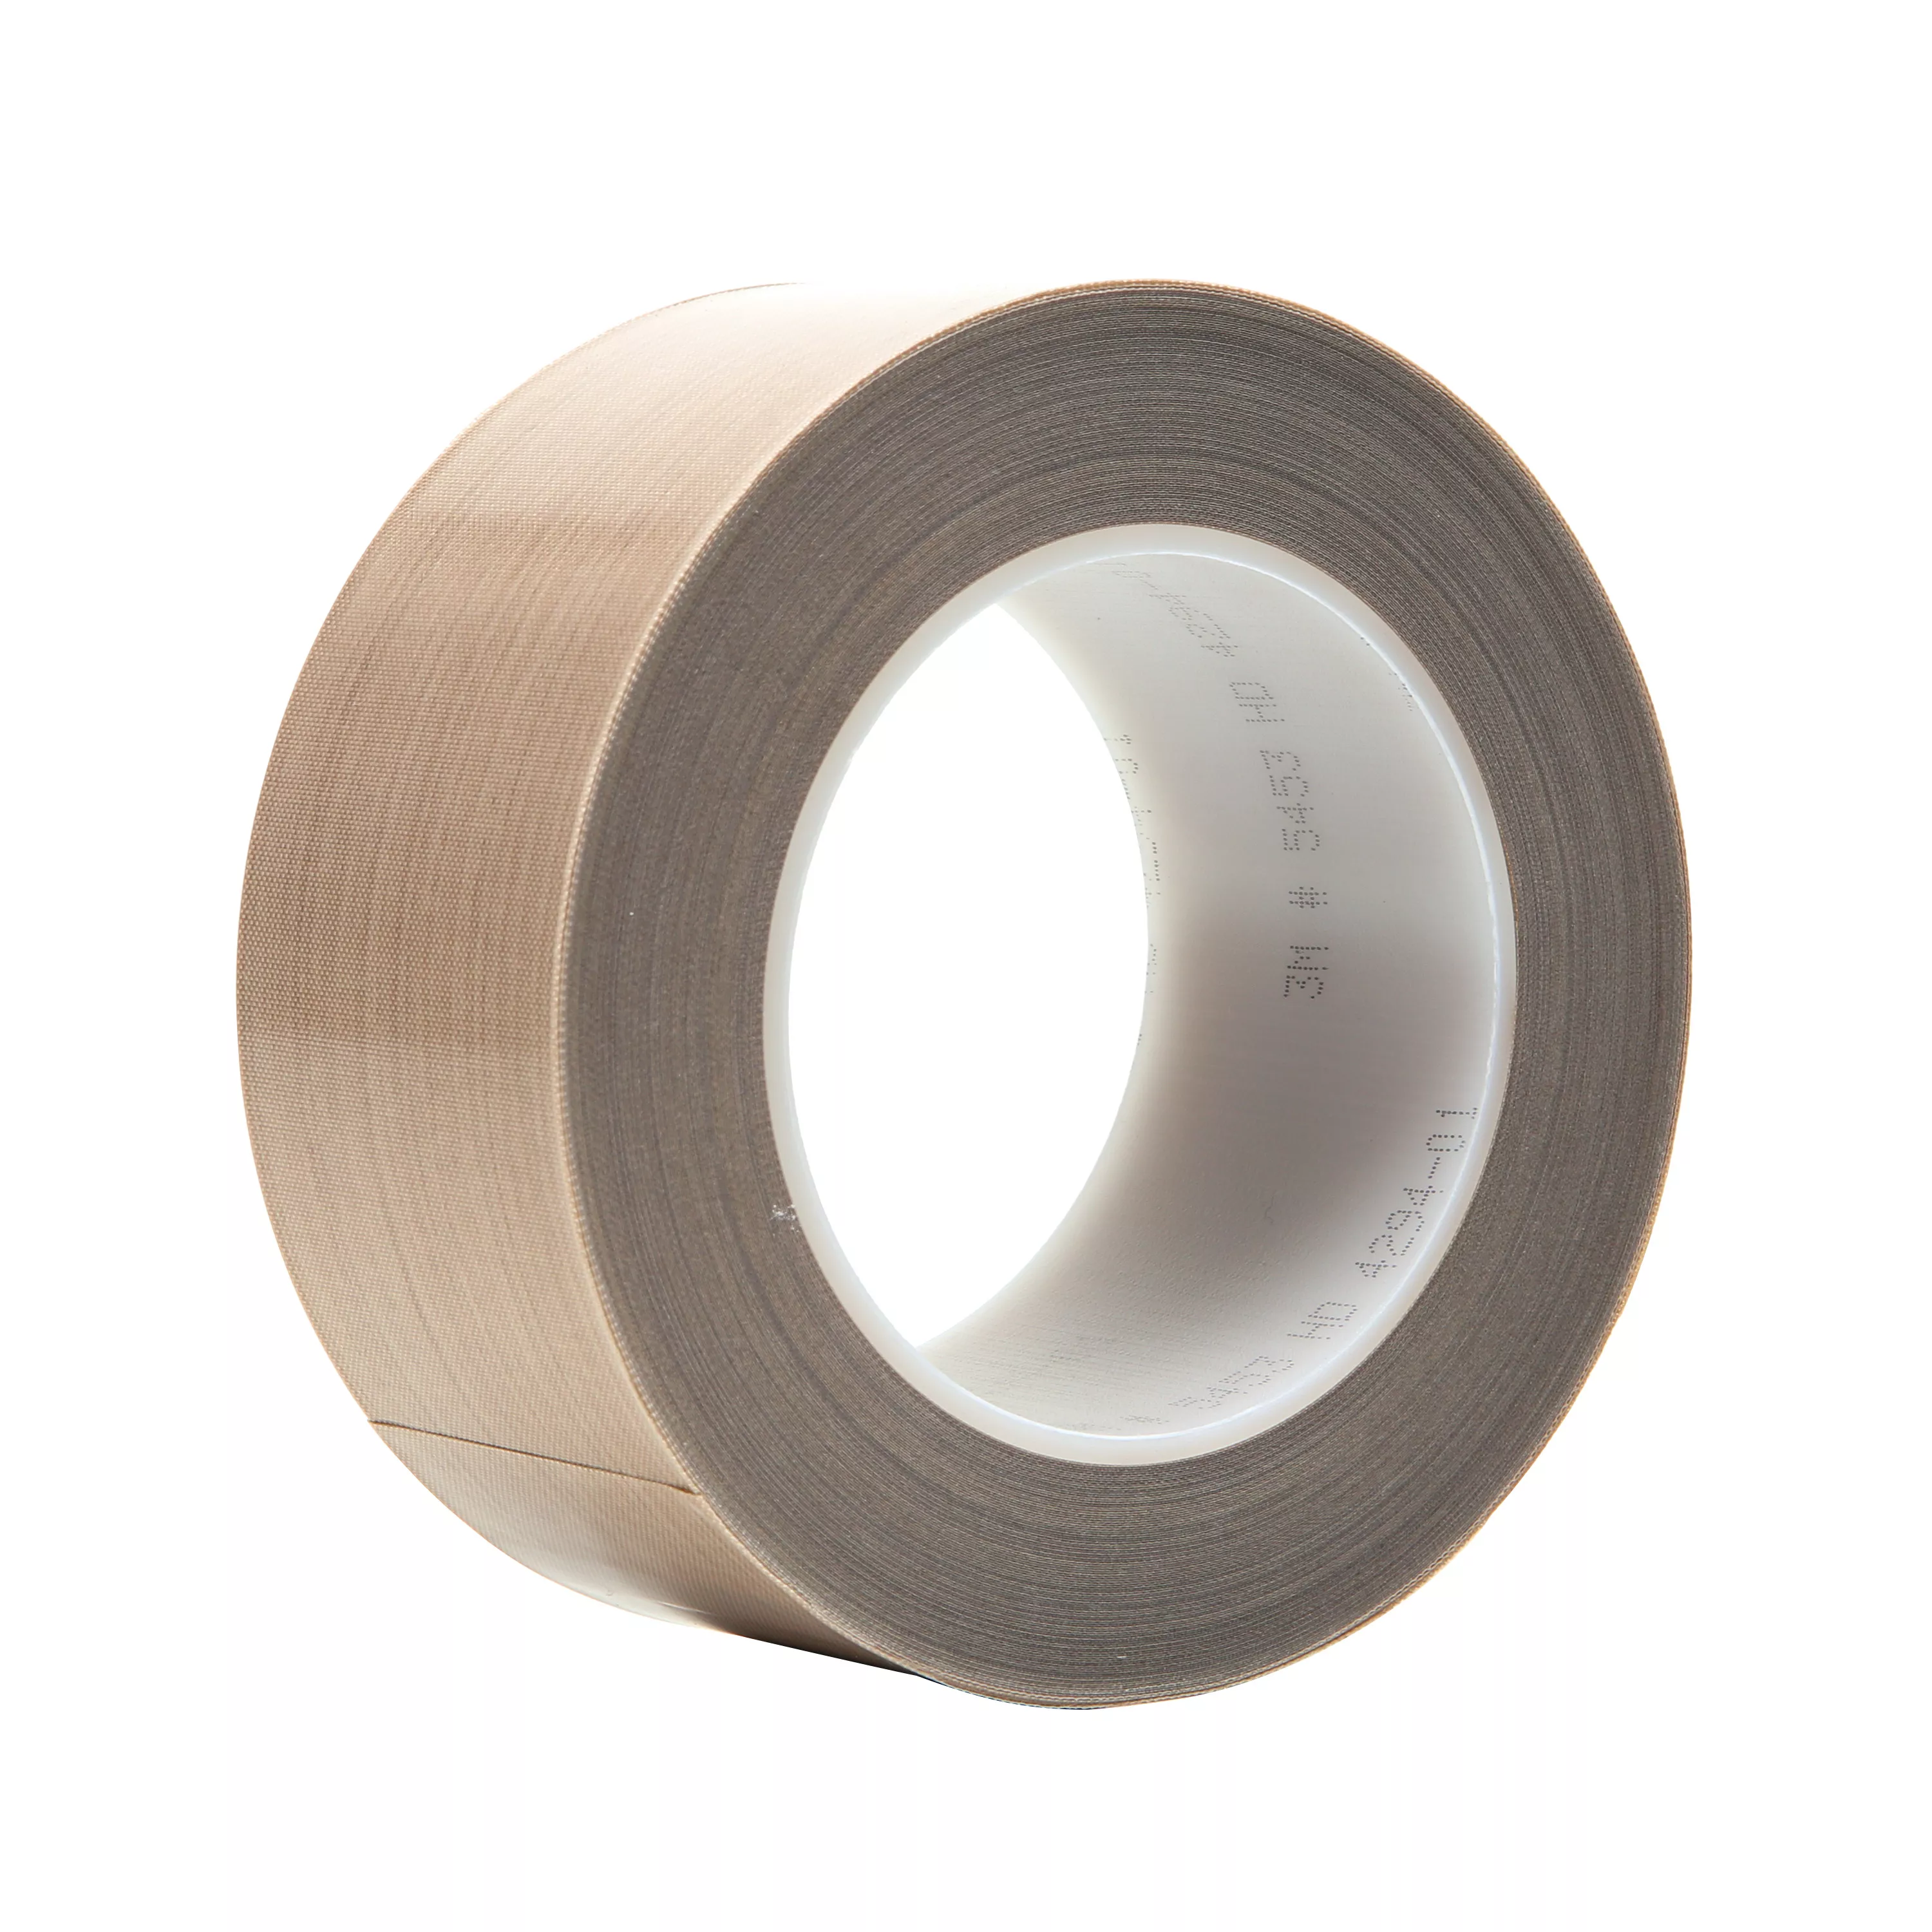 3M™ PTFE Glass Cloth Tape 5453, Brown, 6 in x 36 yd, 8.2 mil, 2
Roll/Case